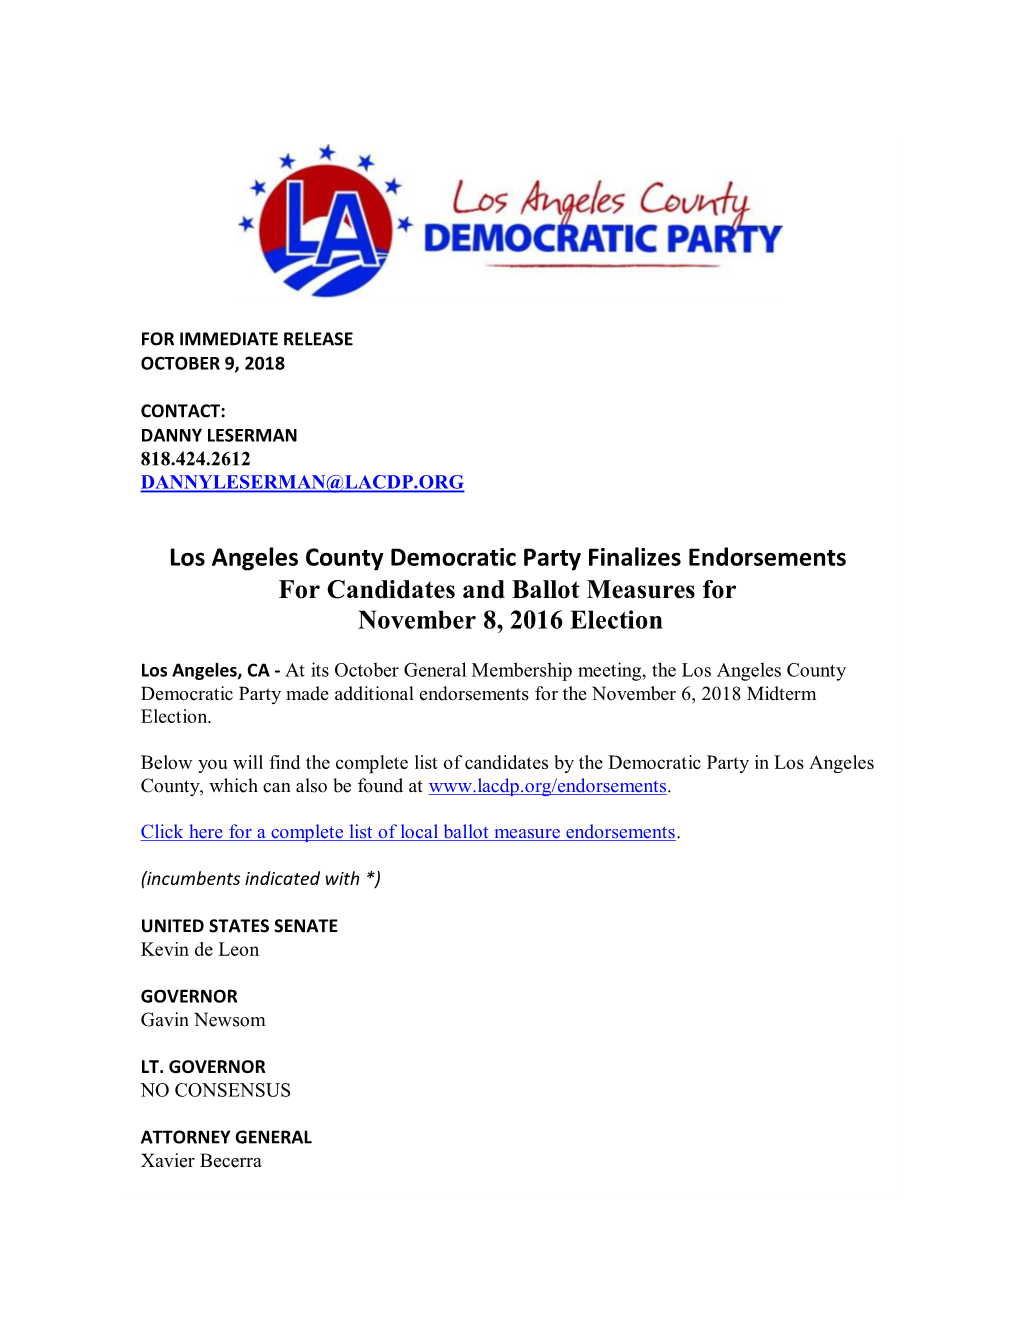 Los Angeles County Democratic Party Finalizes Endorsements for Candidates and Ballot Measures for November 8, 2016 Election